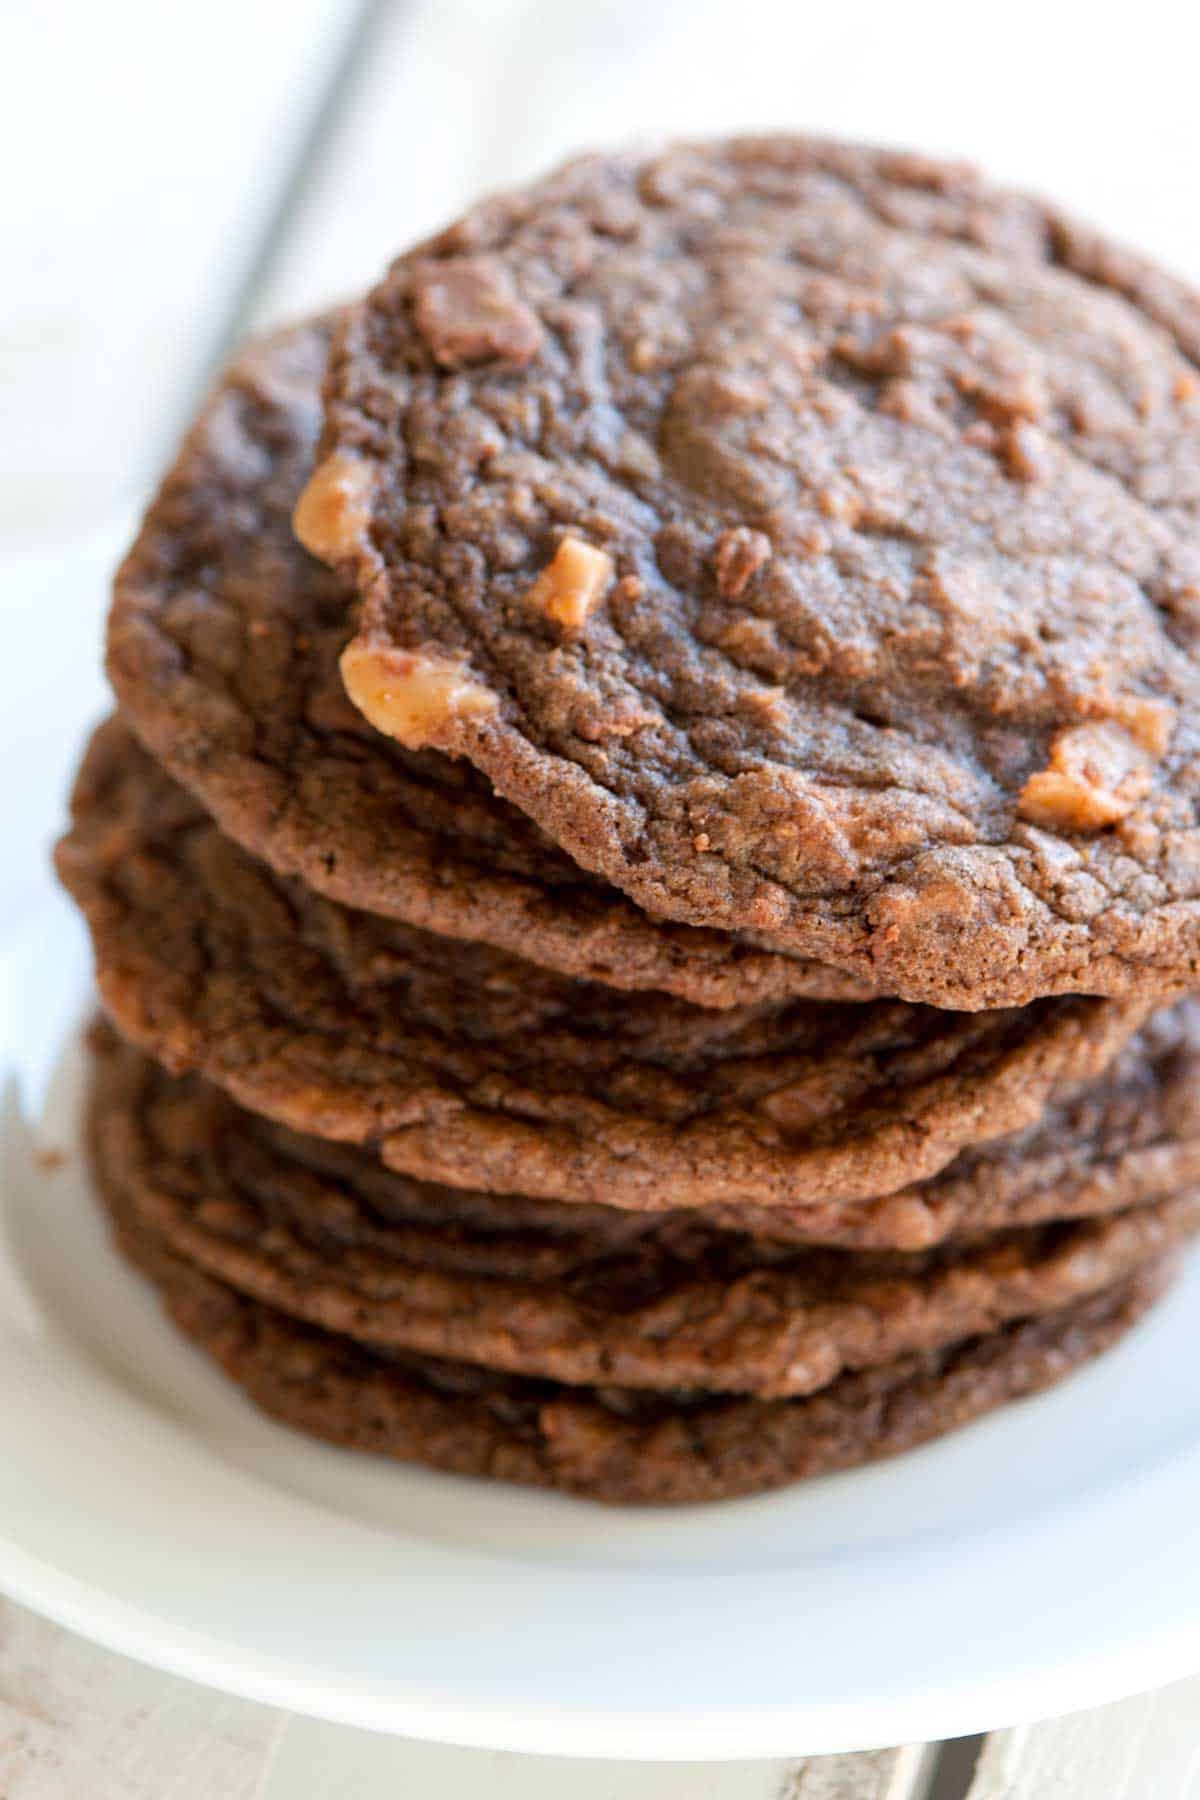 How to Make Chocolate Toffee Cookies